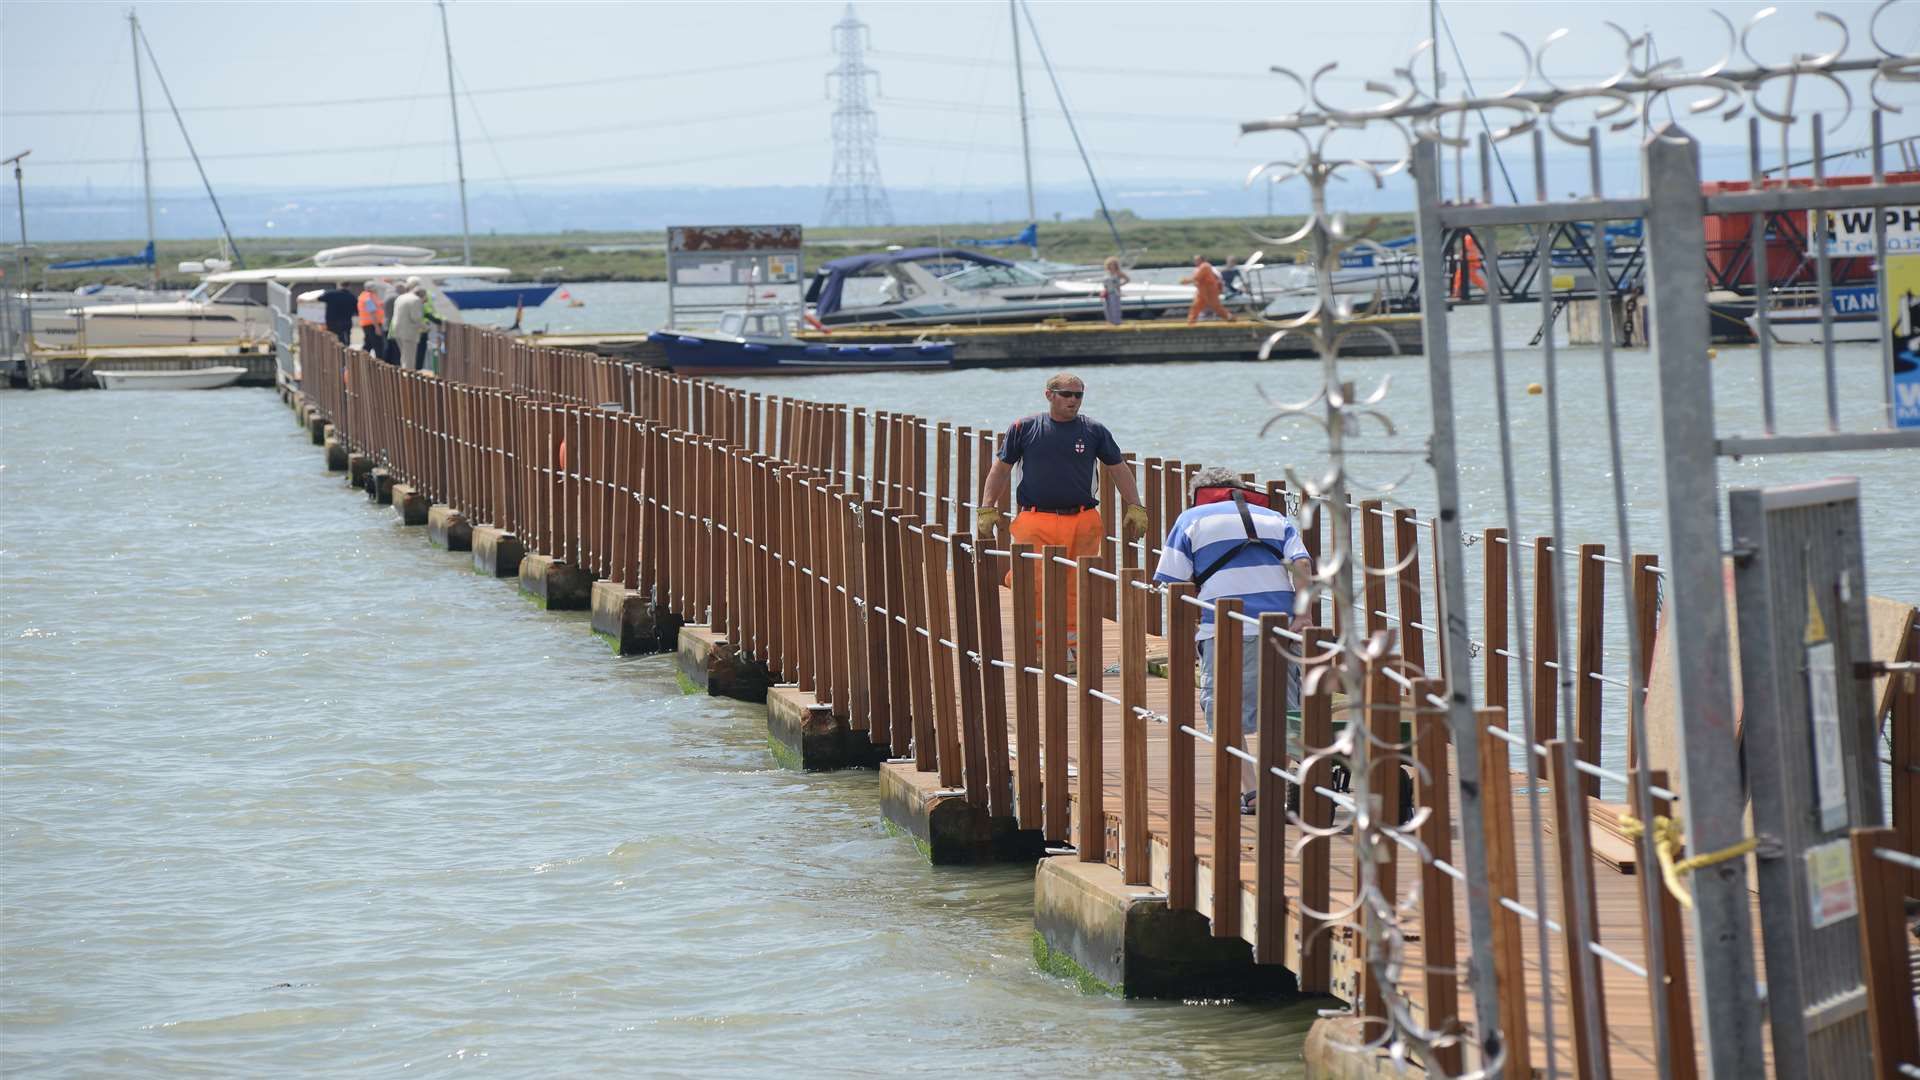 The all-tide landing at Queenborough